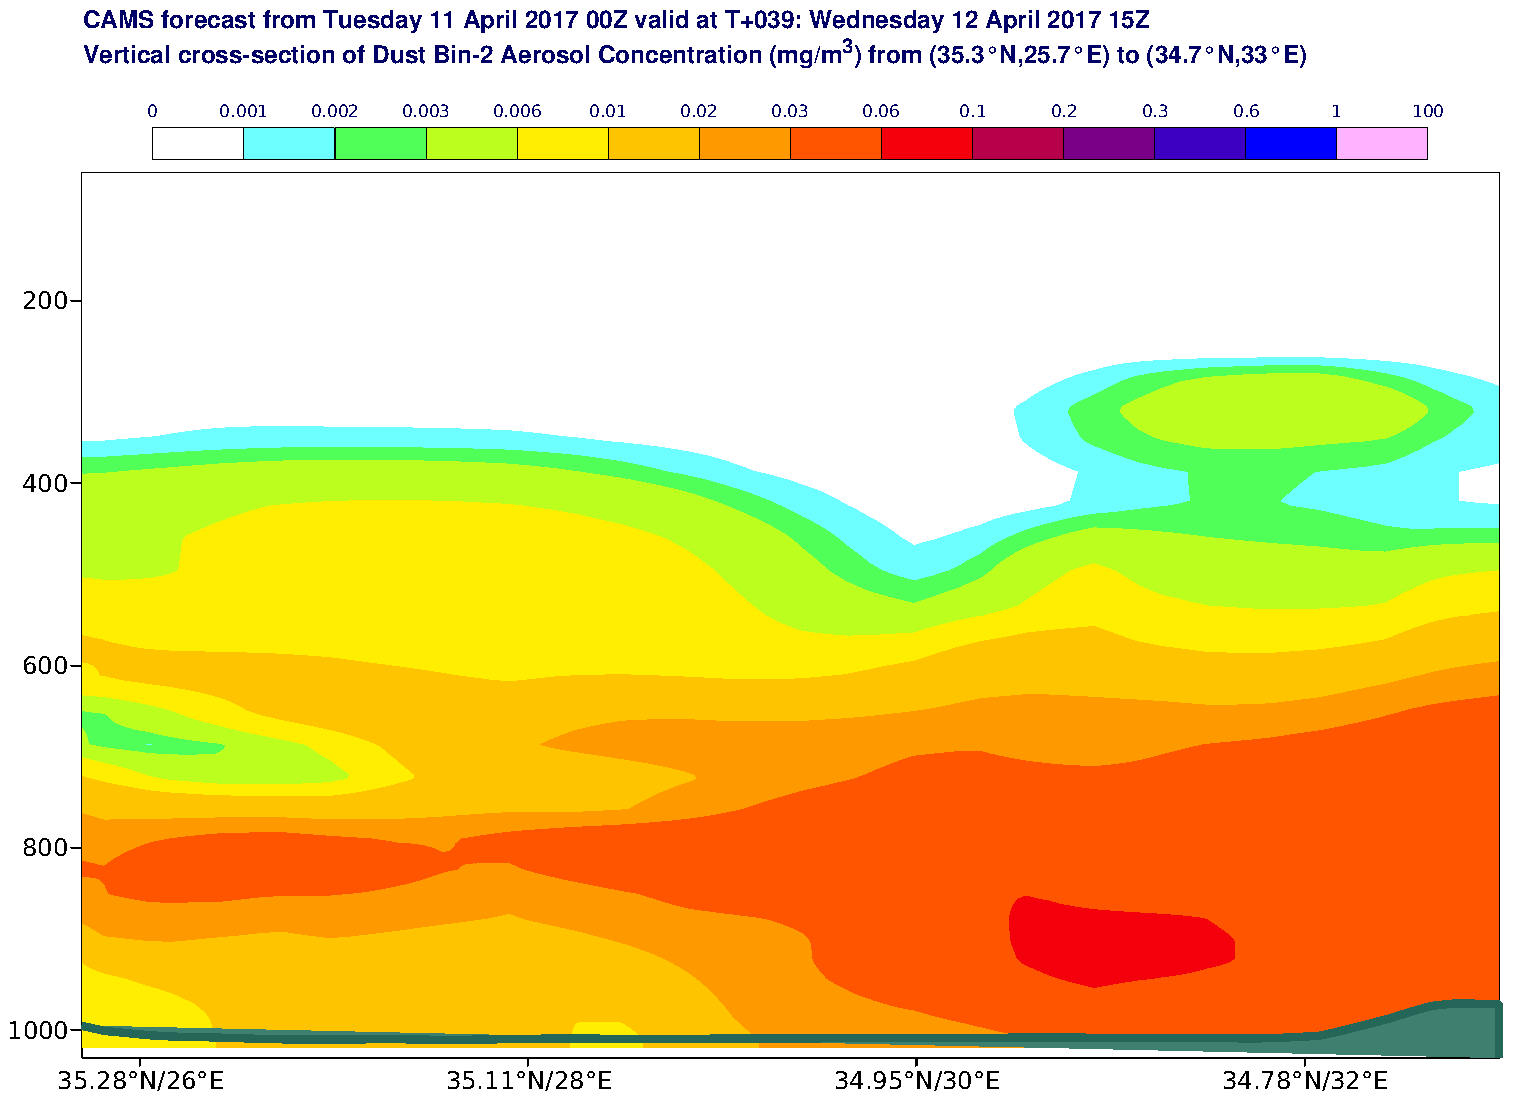 Vertical cross-section of Dust Bin-2 Aerosol Concentration (mg/m3) valid at T39 - 2017-04-12 15:00